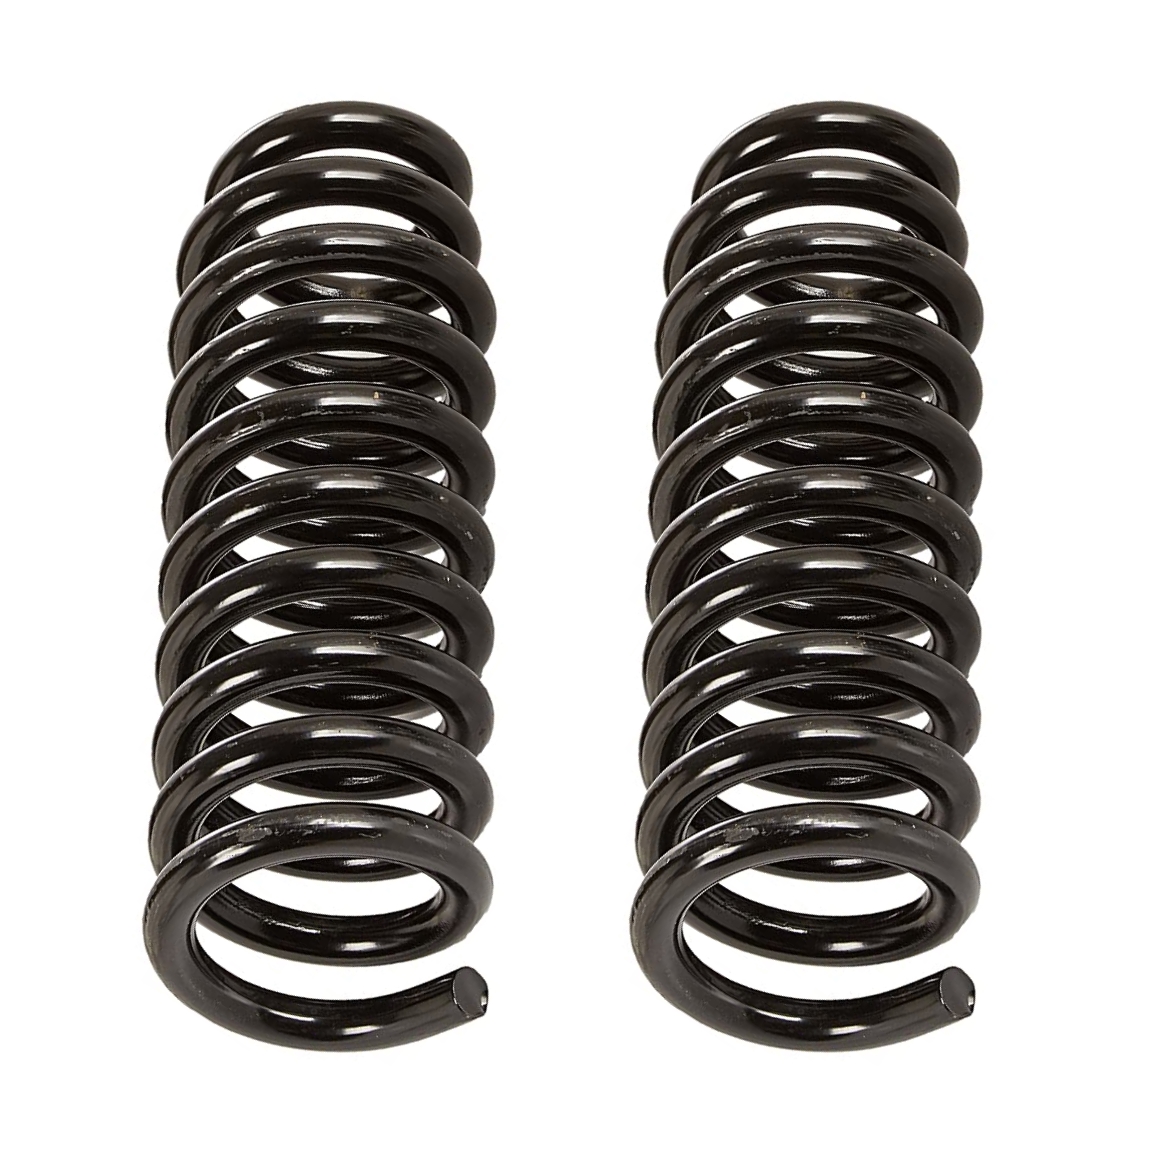 Pro Comp 24613 6 Front Coil Spring for Ford F150 81-96 